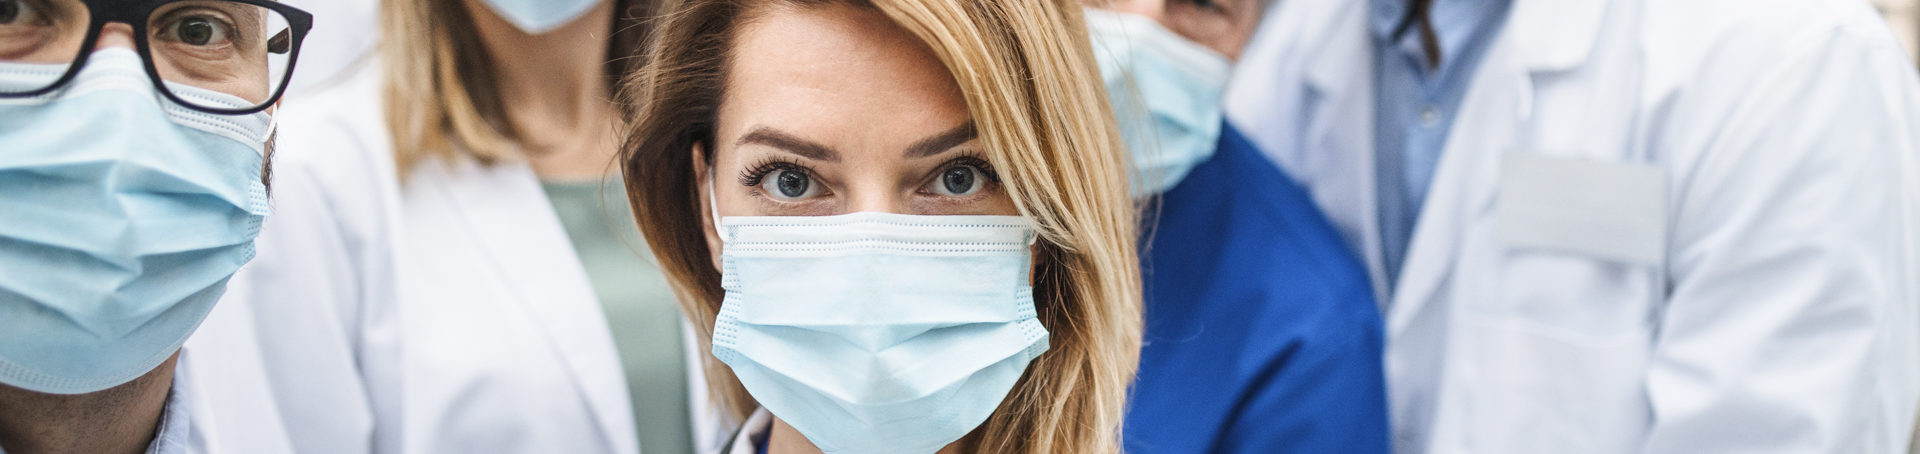 woman in medical mask looking into camera